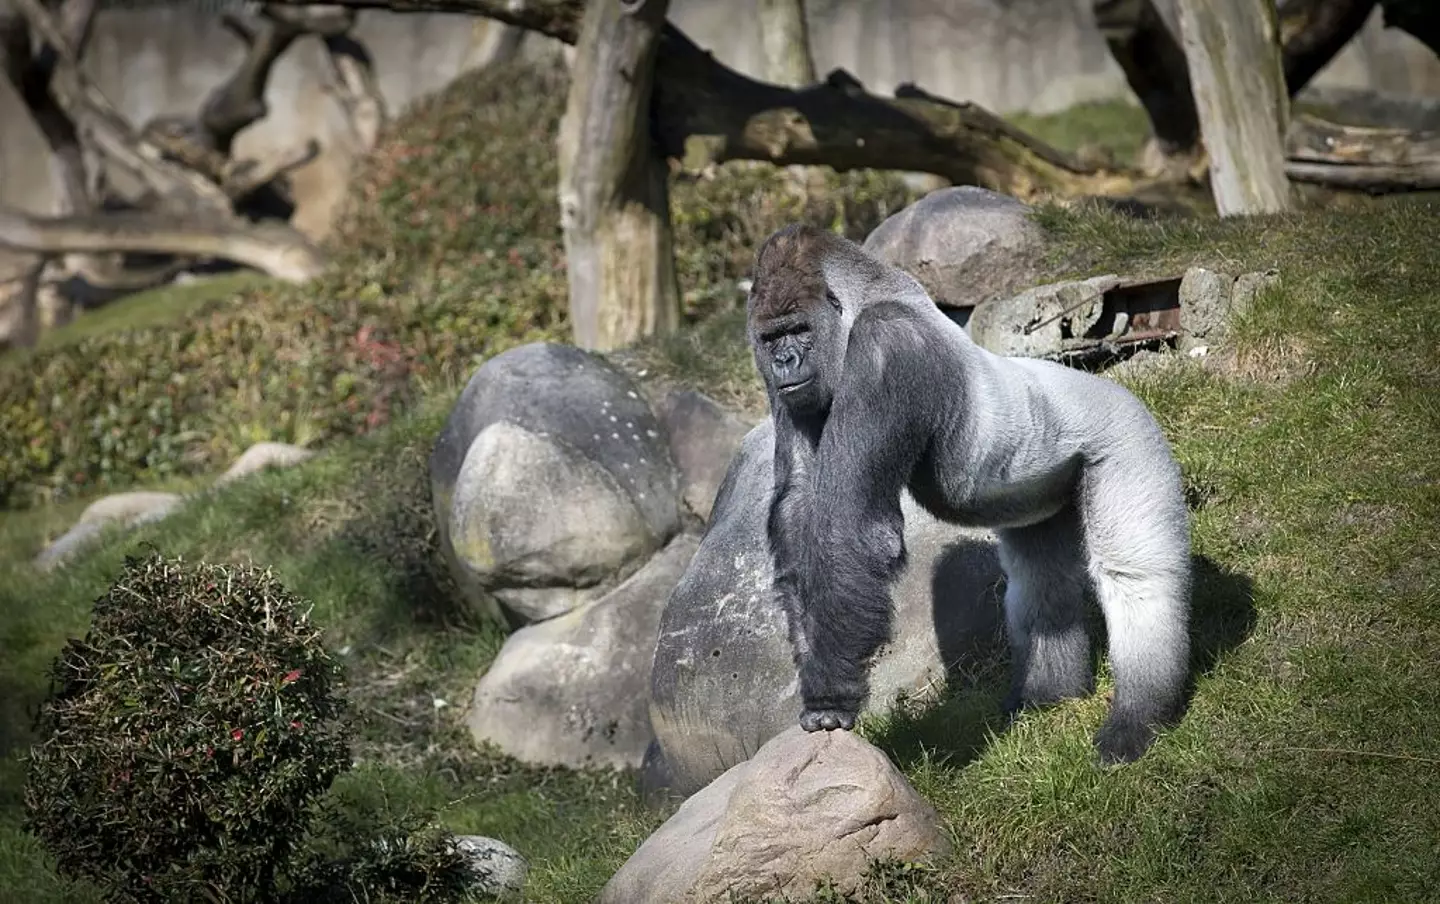 Bokito escaped from his enclosure in 2007 (JERRY LAMPEN/AFP via Getty Images)